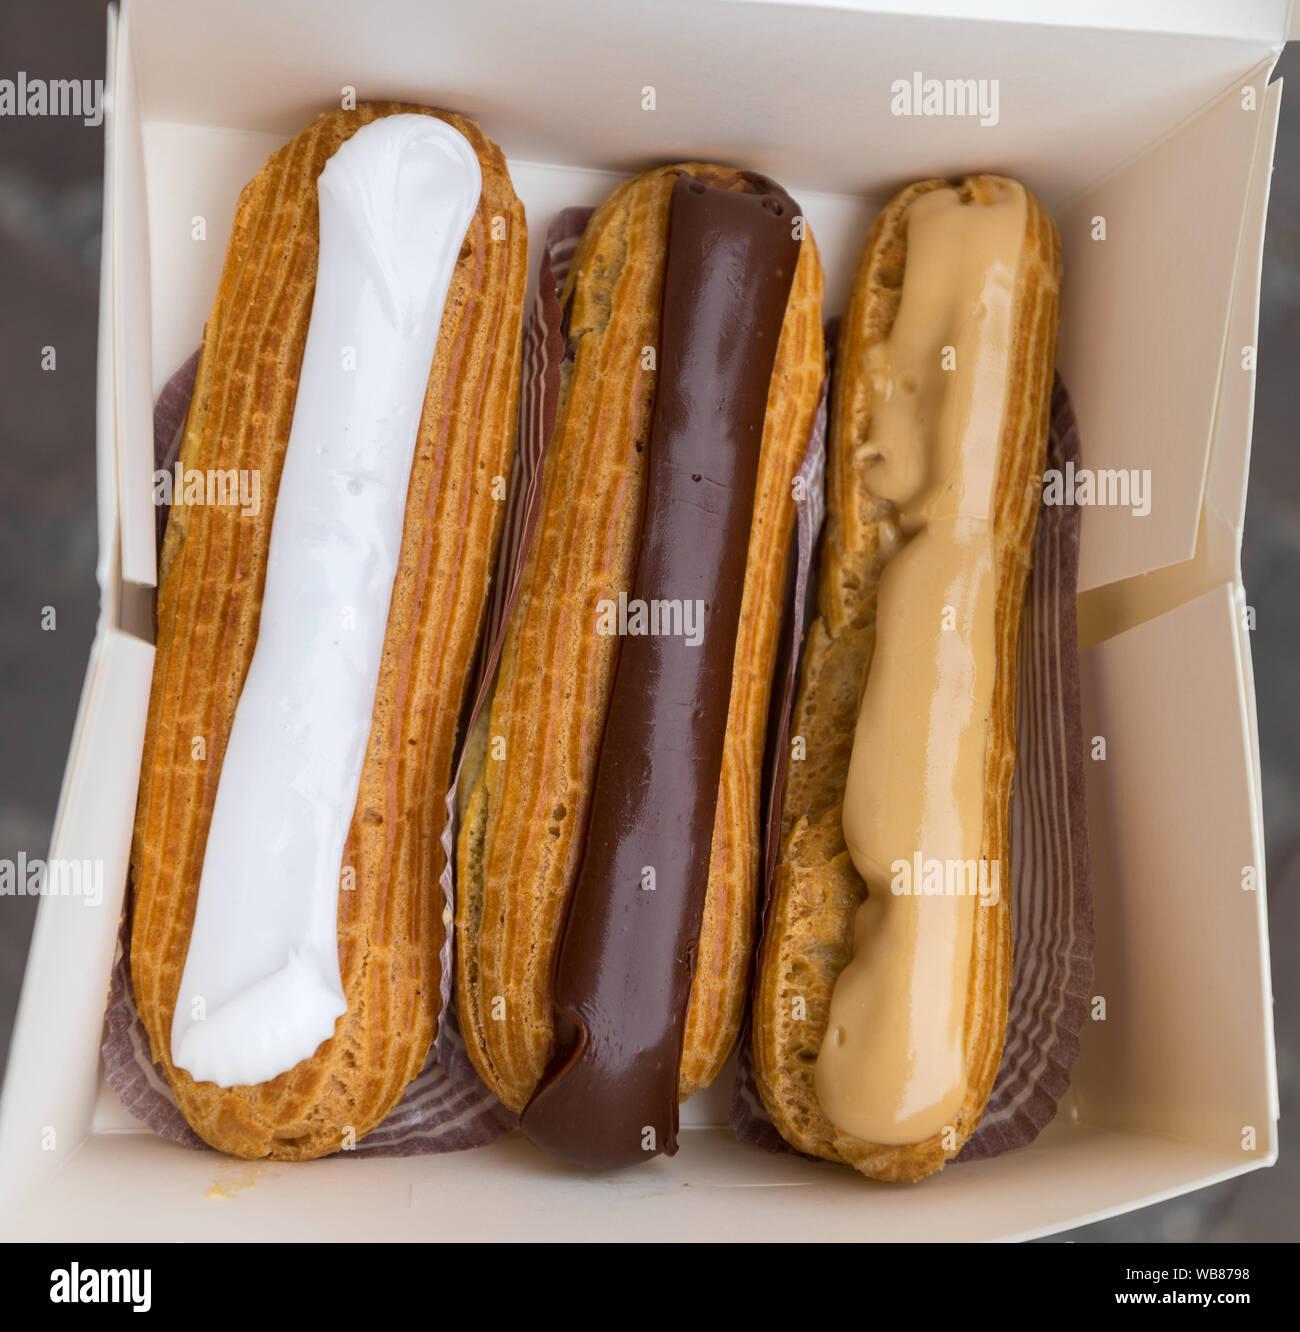 Colorful Eclairs In The Box. Eclairs Laying Inside White Boxes. Eclair Cakes With Scalded Carmel And Coffee Butter Cream. Stock Photo